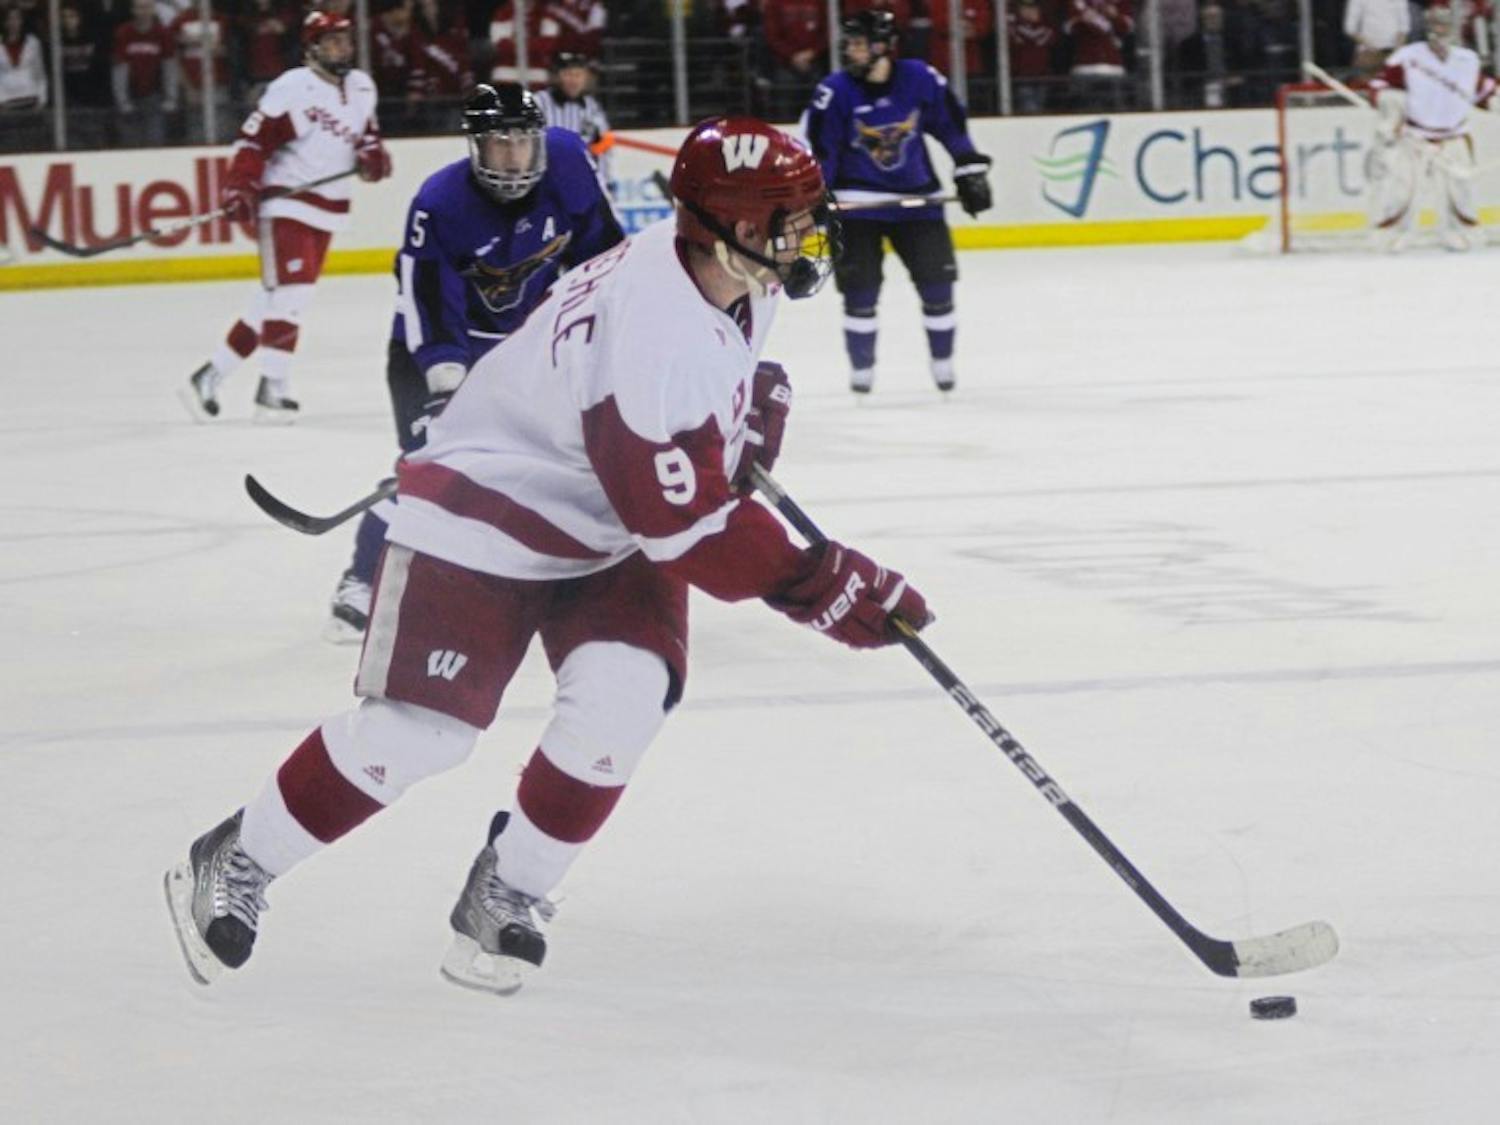 Men's hockey looking to get back on track against Minnesota